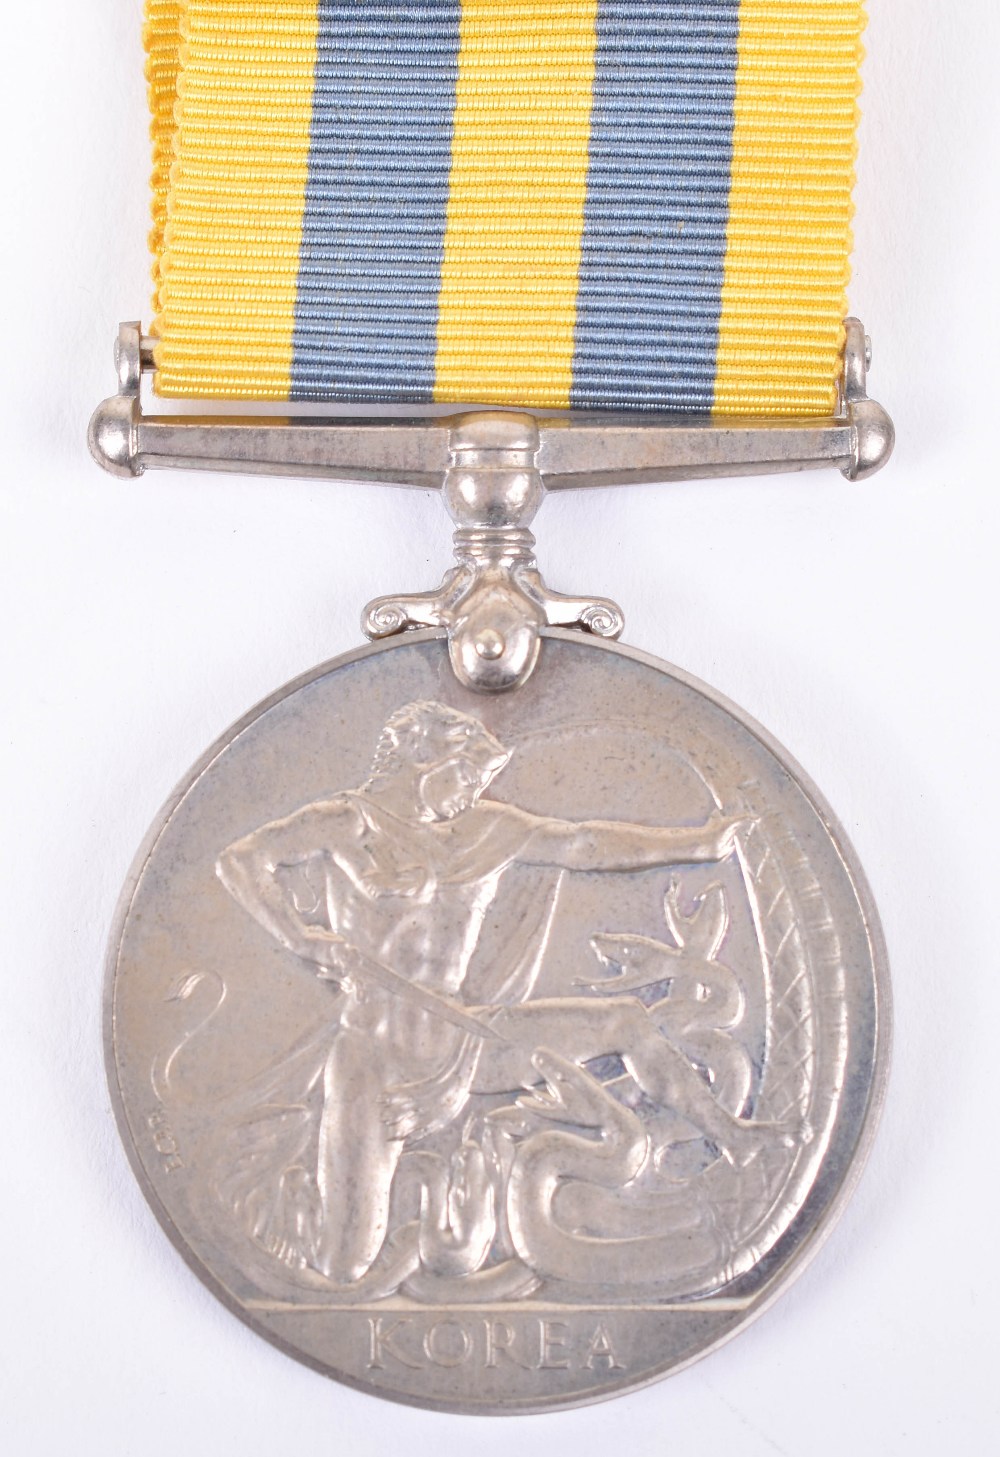 Queens Korea Campaign Medal 1950-53 Royal Engineers - Image 2 of 3